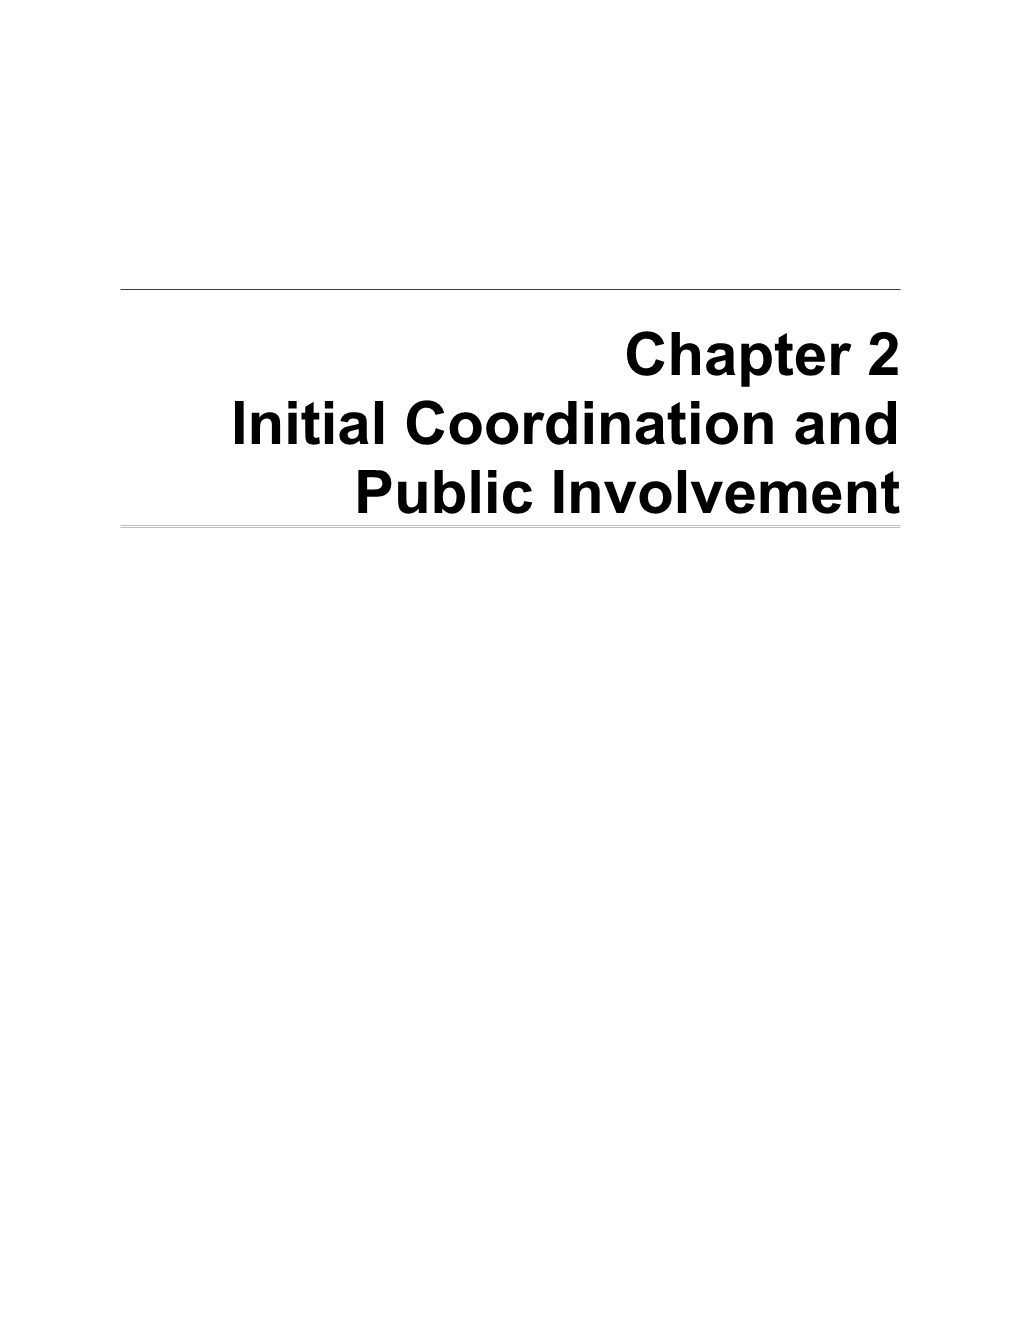 Initial Coordination and Public Involvement